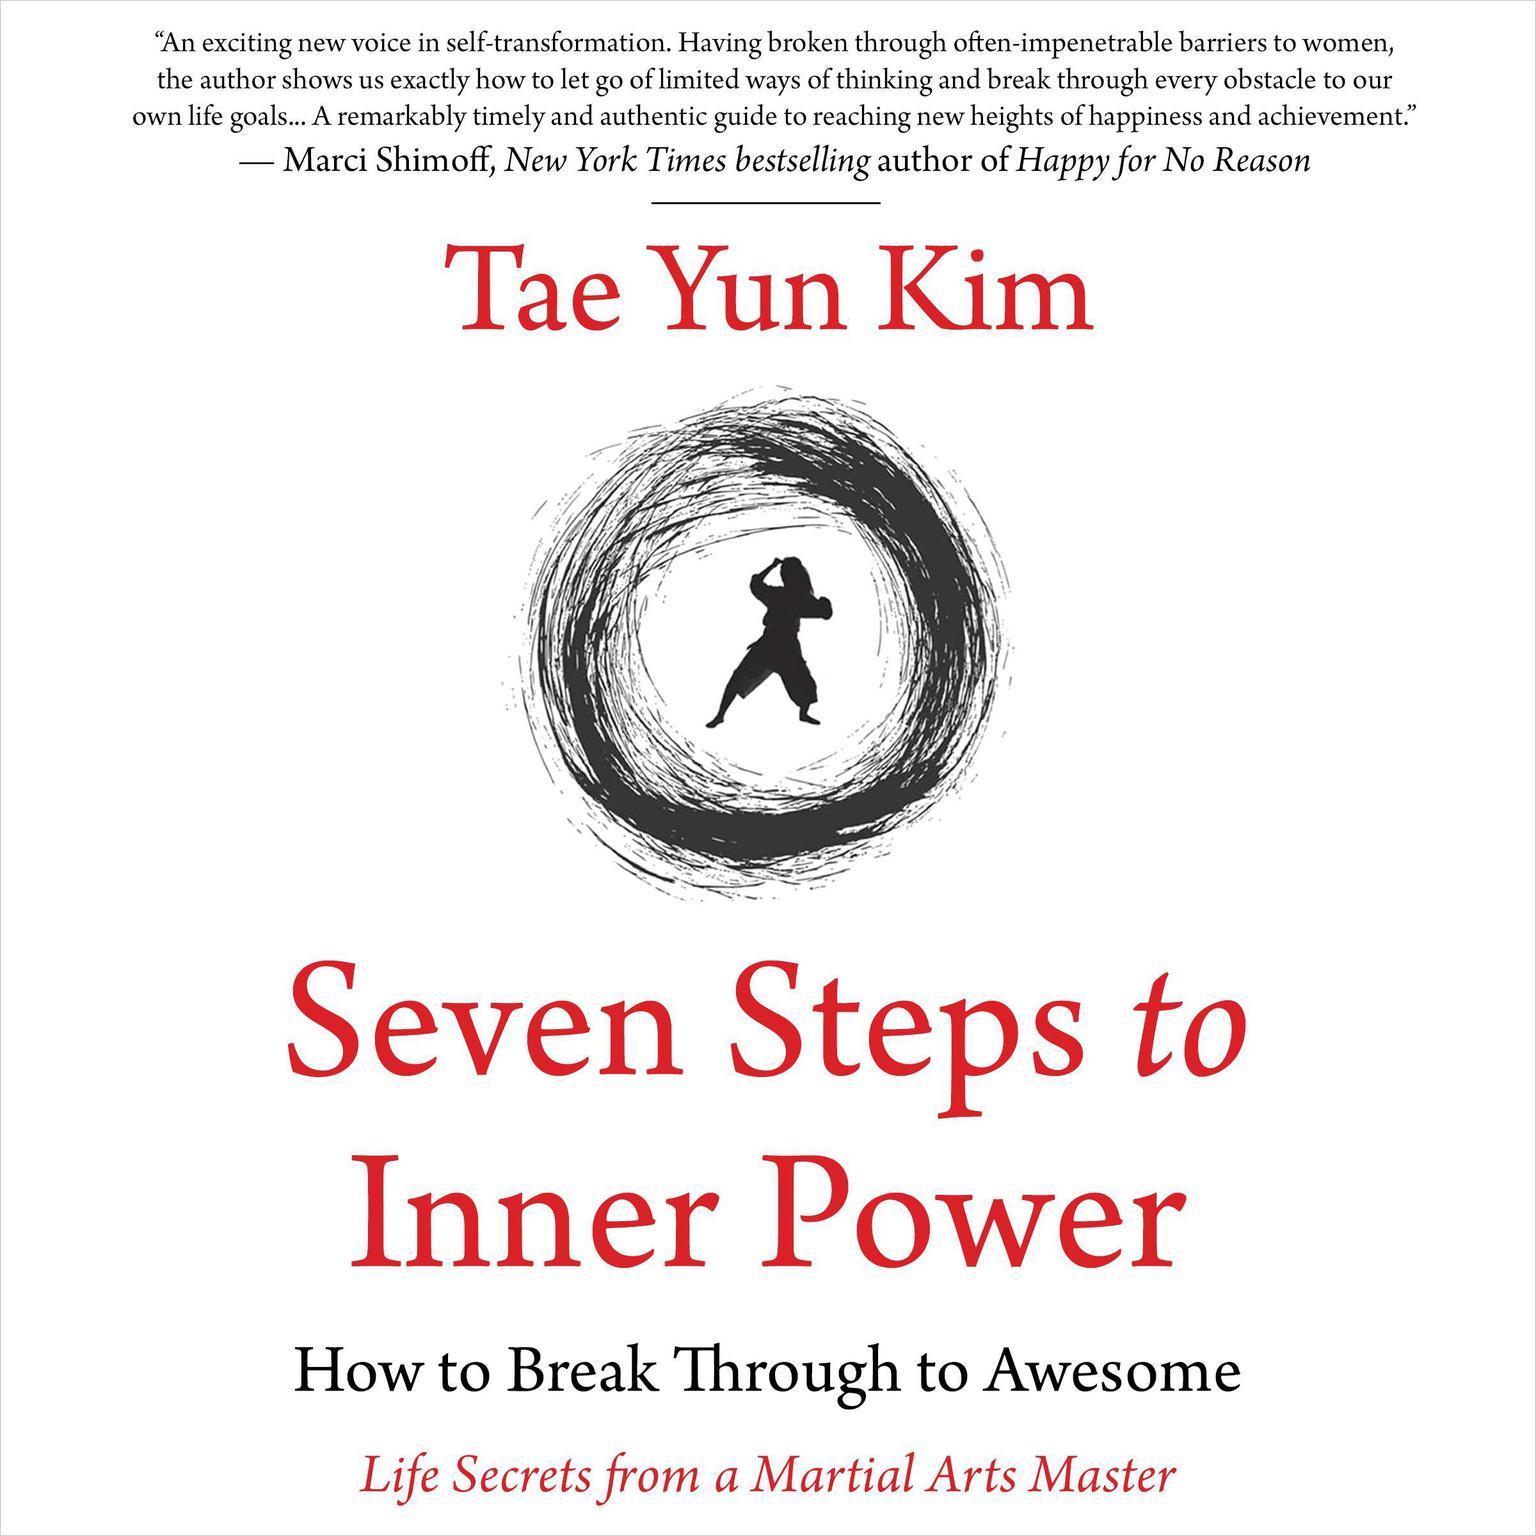 Seven Steps to Inner Power: How to Break Through to Awesome: Life Secrets from a Martial Arts Master Audiobook, by Tae Yun Kim